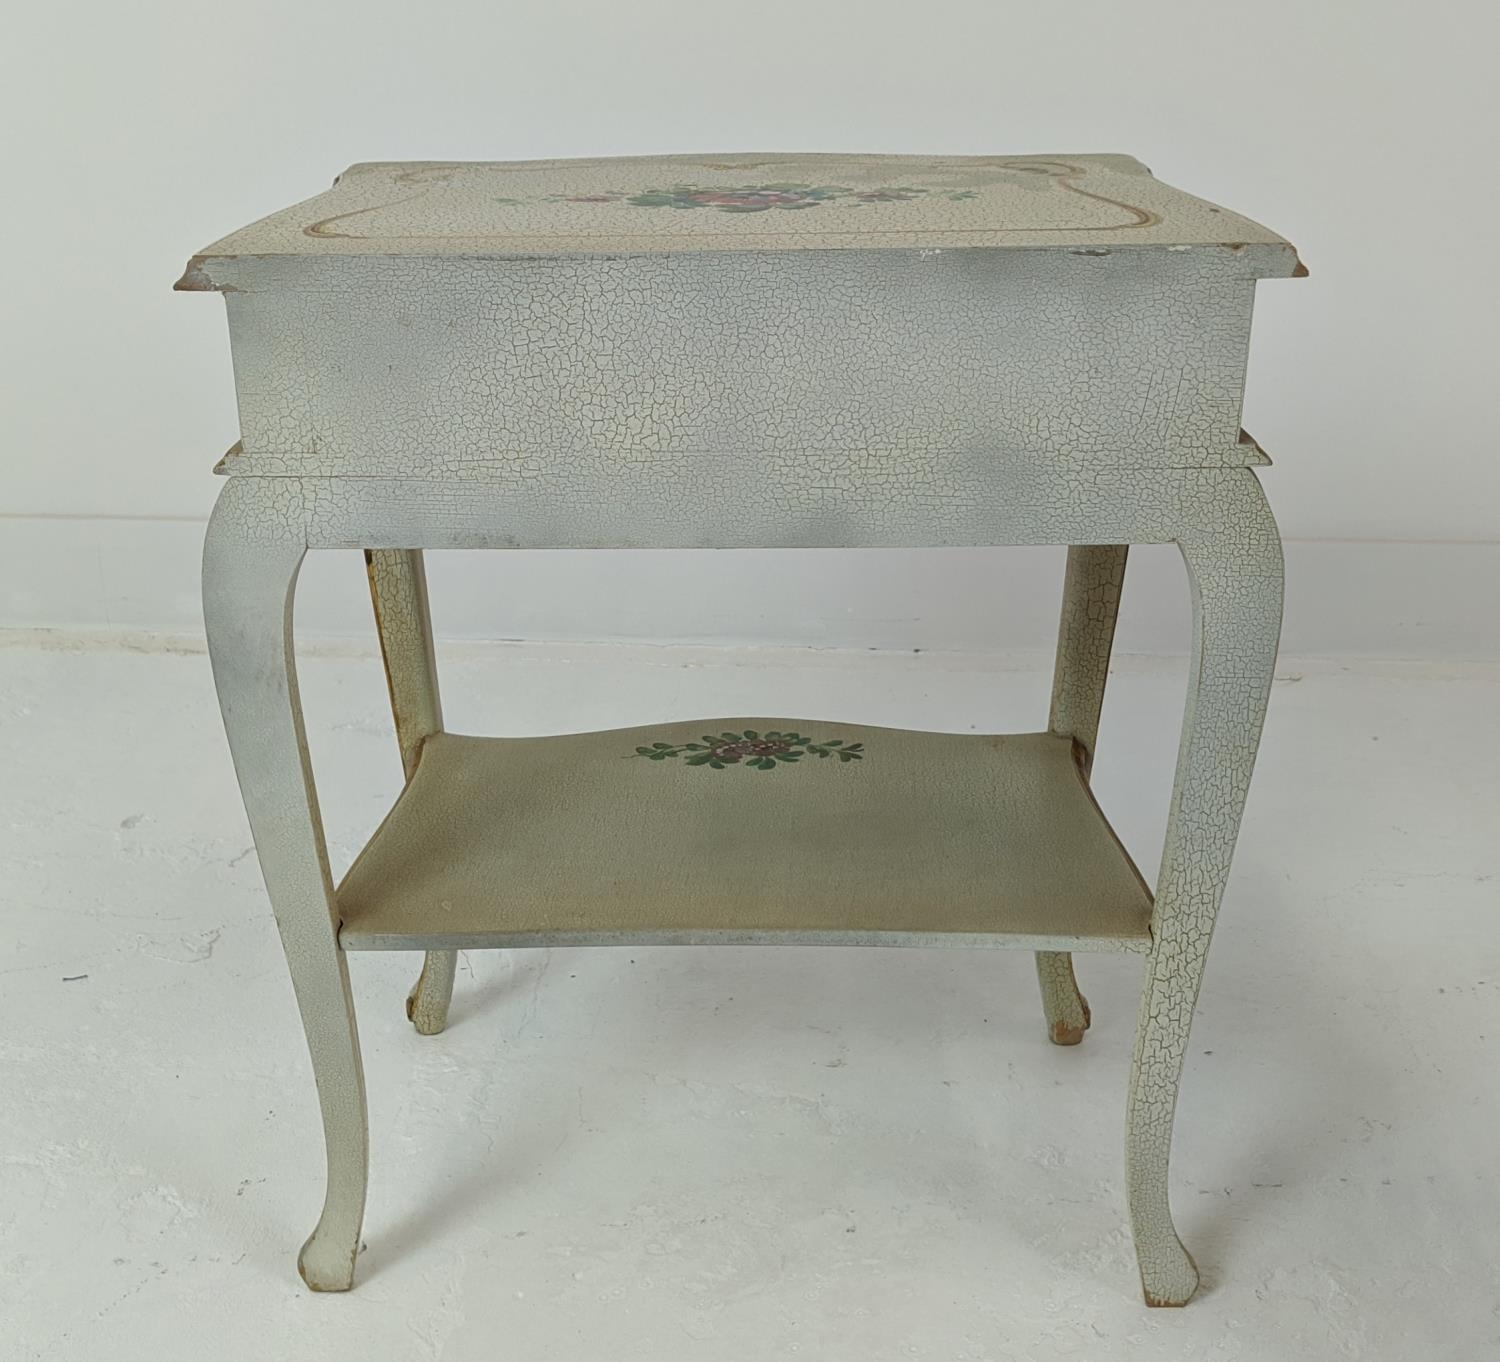 SERPENTINE BEDSIDE TABLES, Italianate craquelure, floral painted and gilt heightened, each with - Image 7 of 7